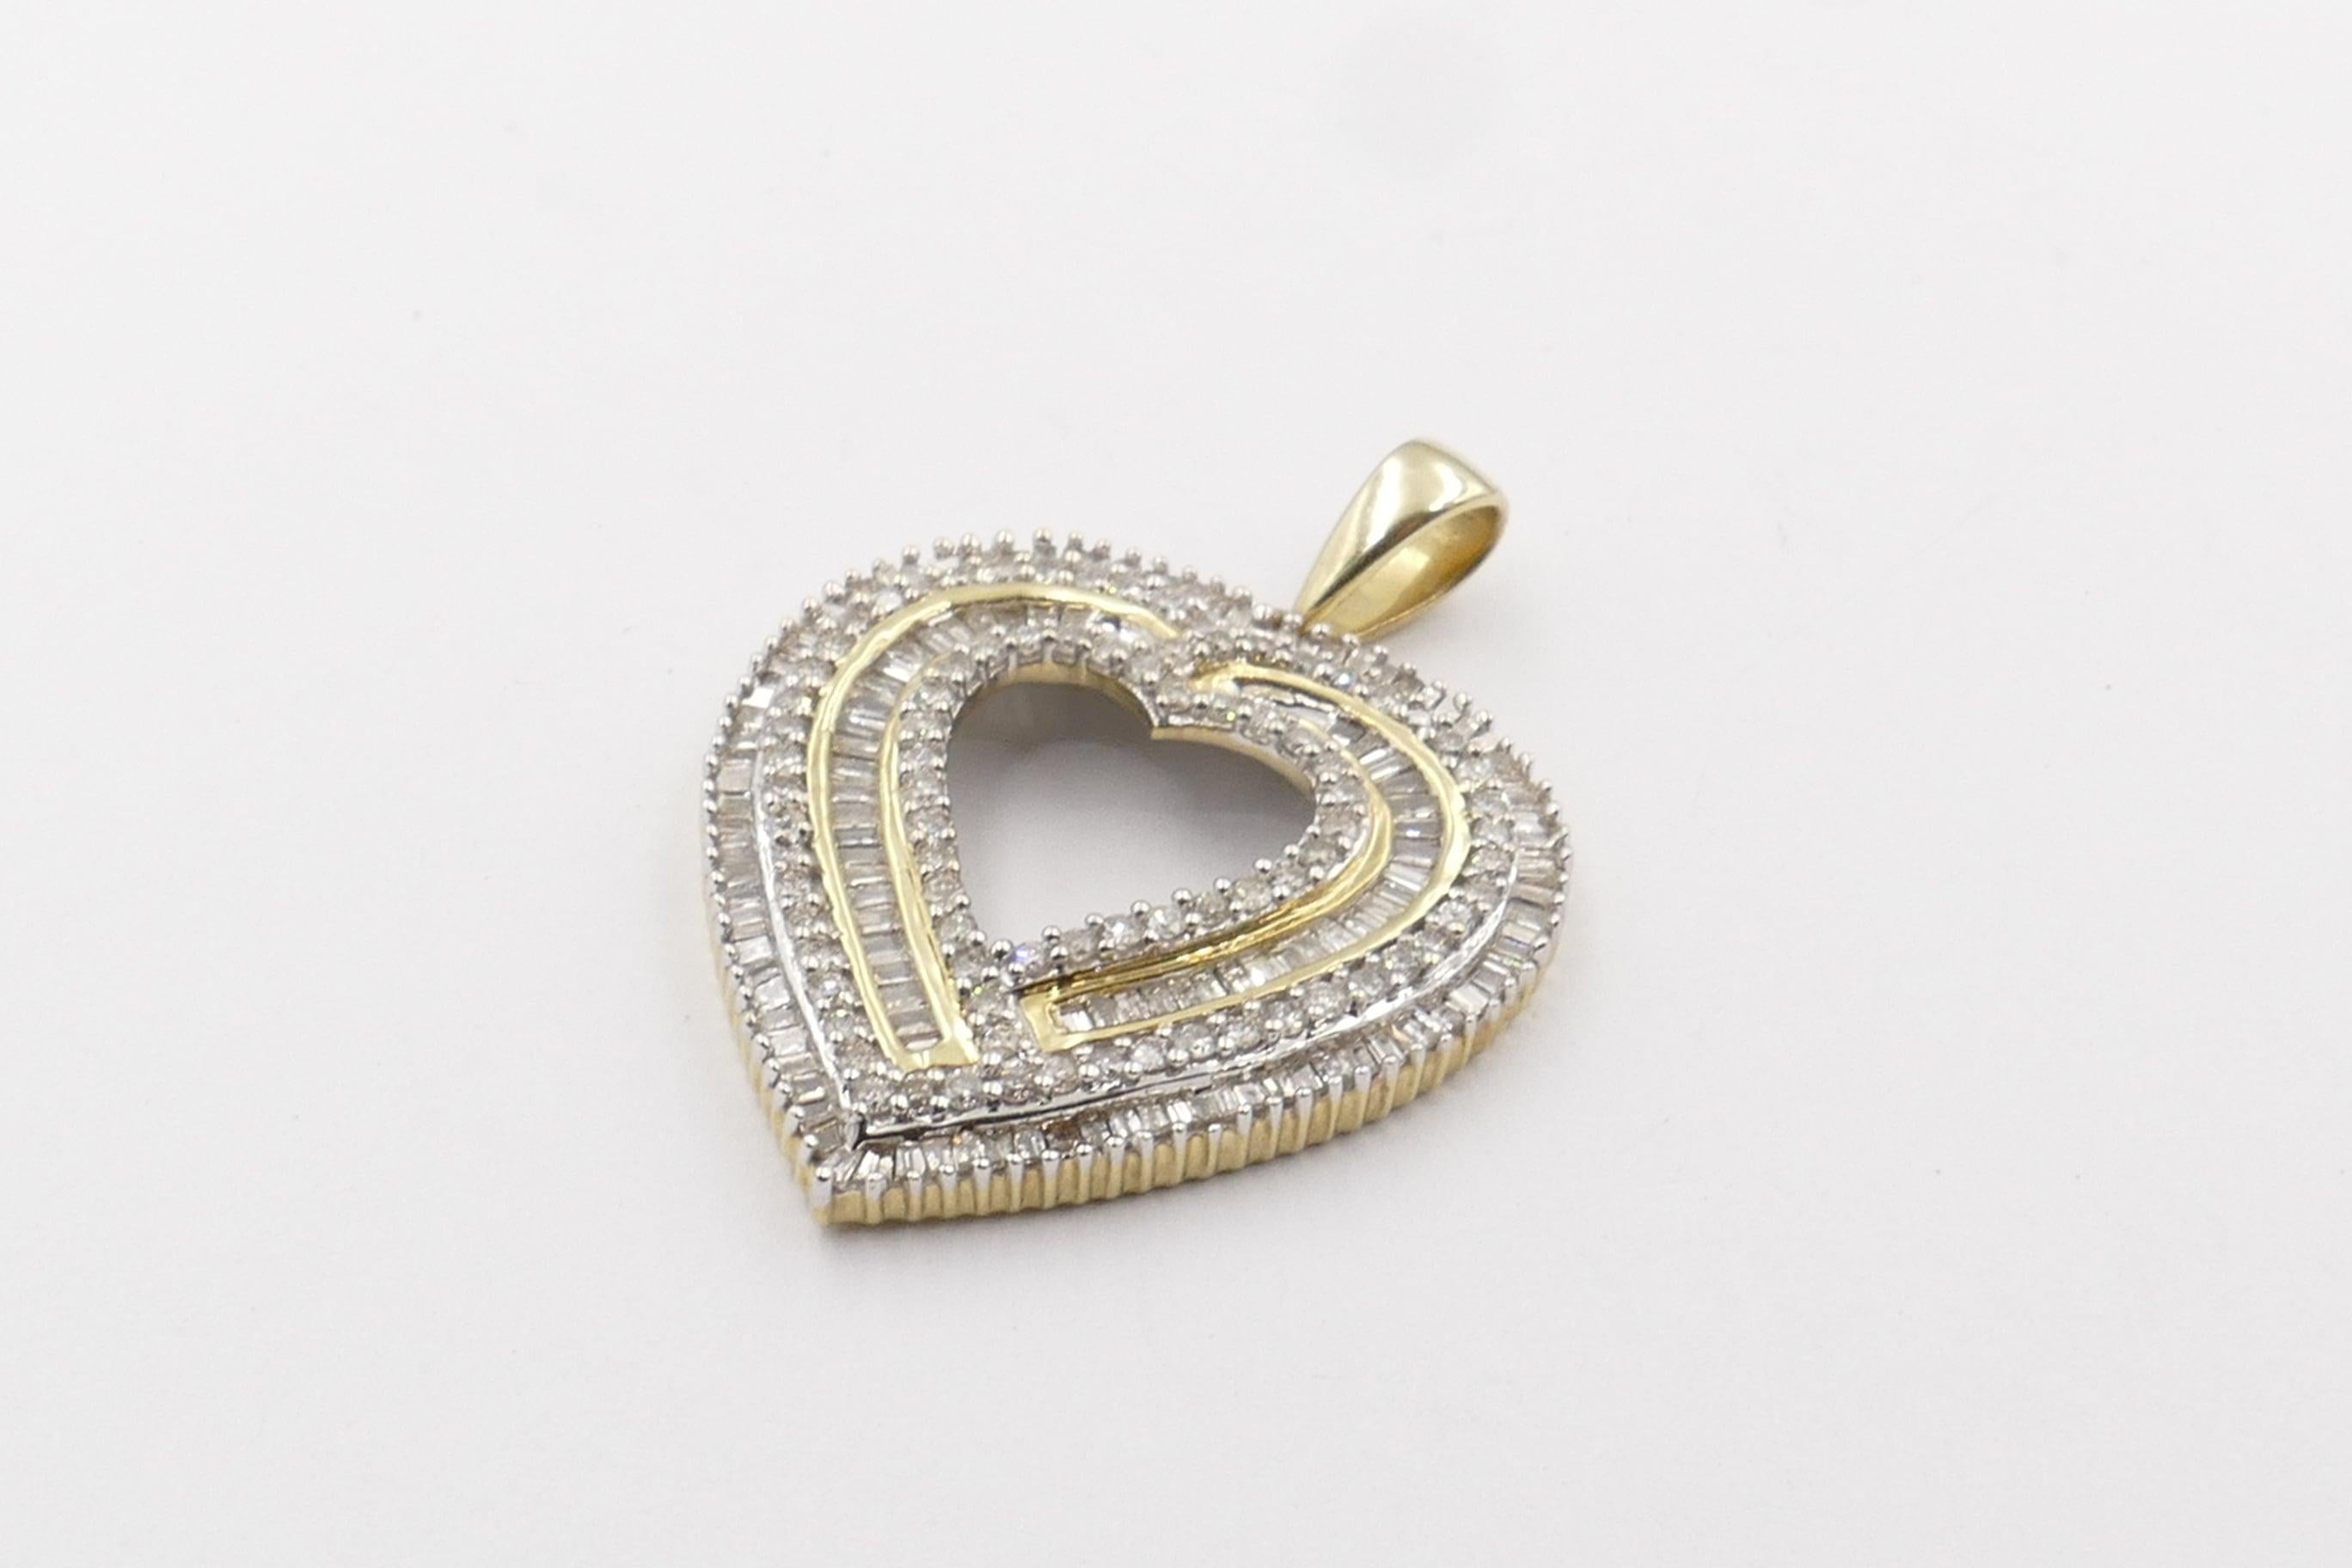 There is a total Diamond Weight of 1.52 carats, featuring both Round Brilliant Cut & Baguette Diamonds in this very pretty, large size Heart Pendant. Very attractive indeed. Looking at it front on it is just beautiful.
Colour of the Diamonds is H-K,